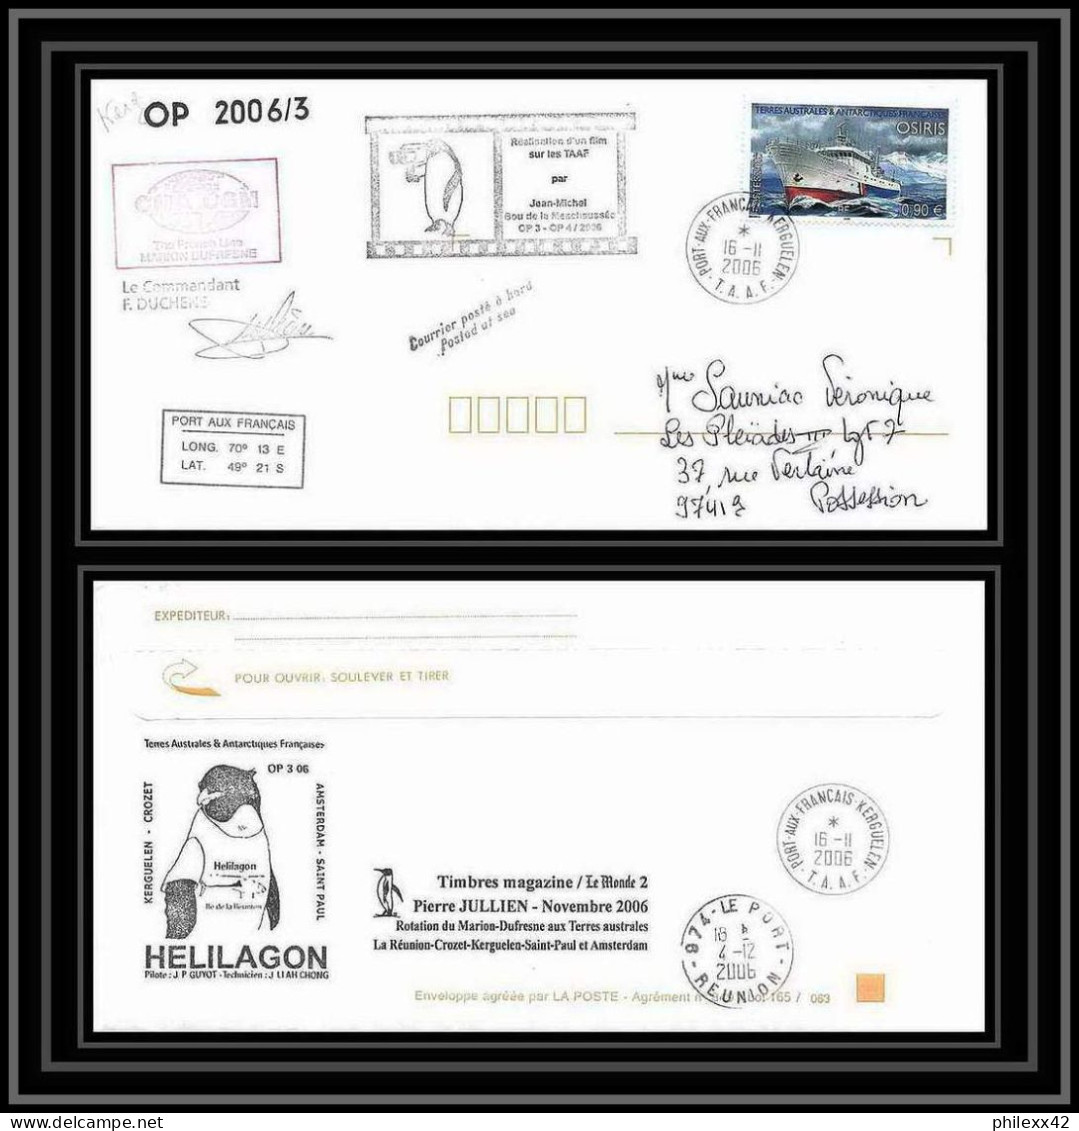 2615 ANTARCTIC Terres Australes TAAF Lettre Cover Dufresne 2 Signé Signed Op 2006/3 N°442 16/11/2006 Kerguelen Helilagon - Helicopters